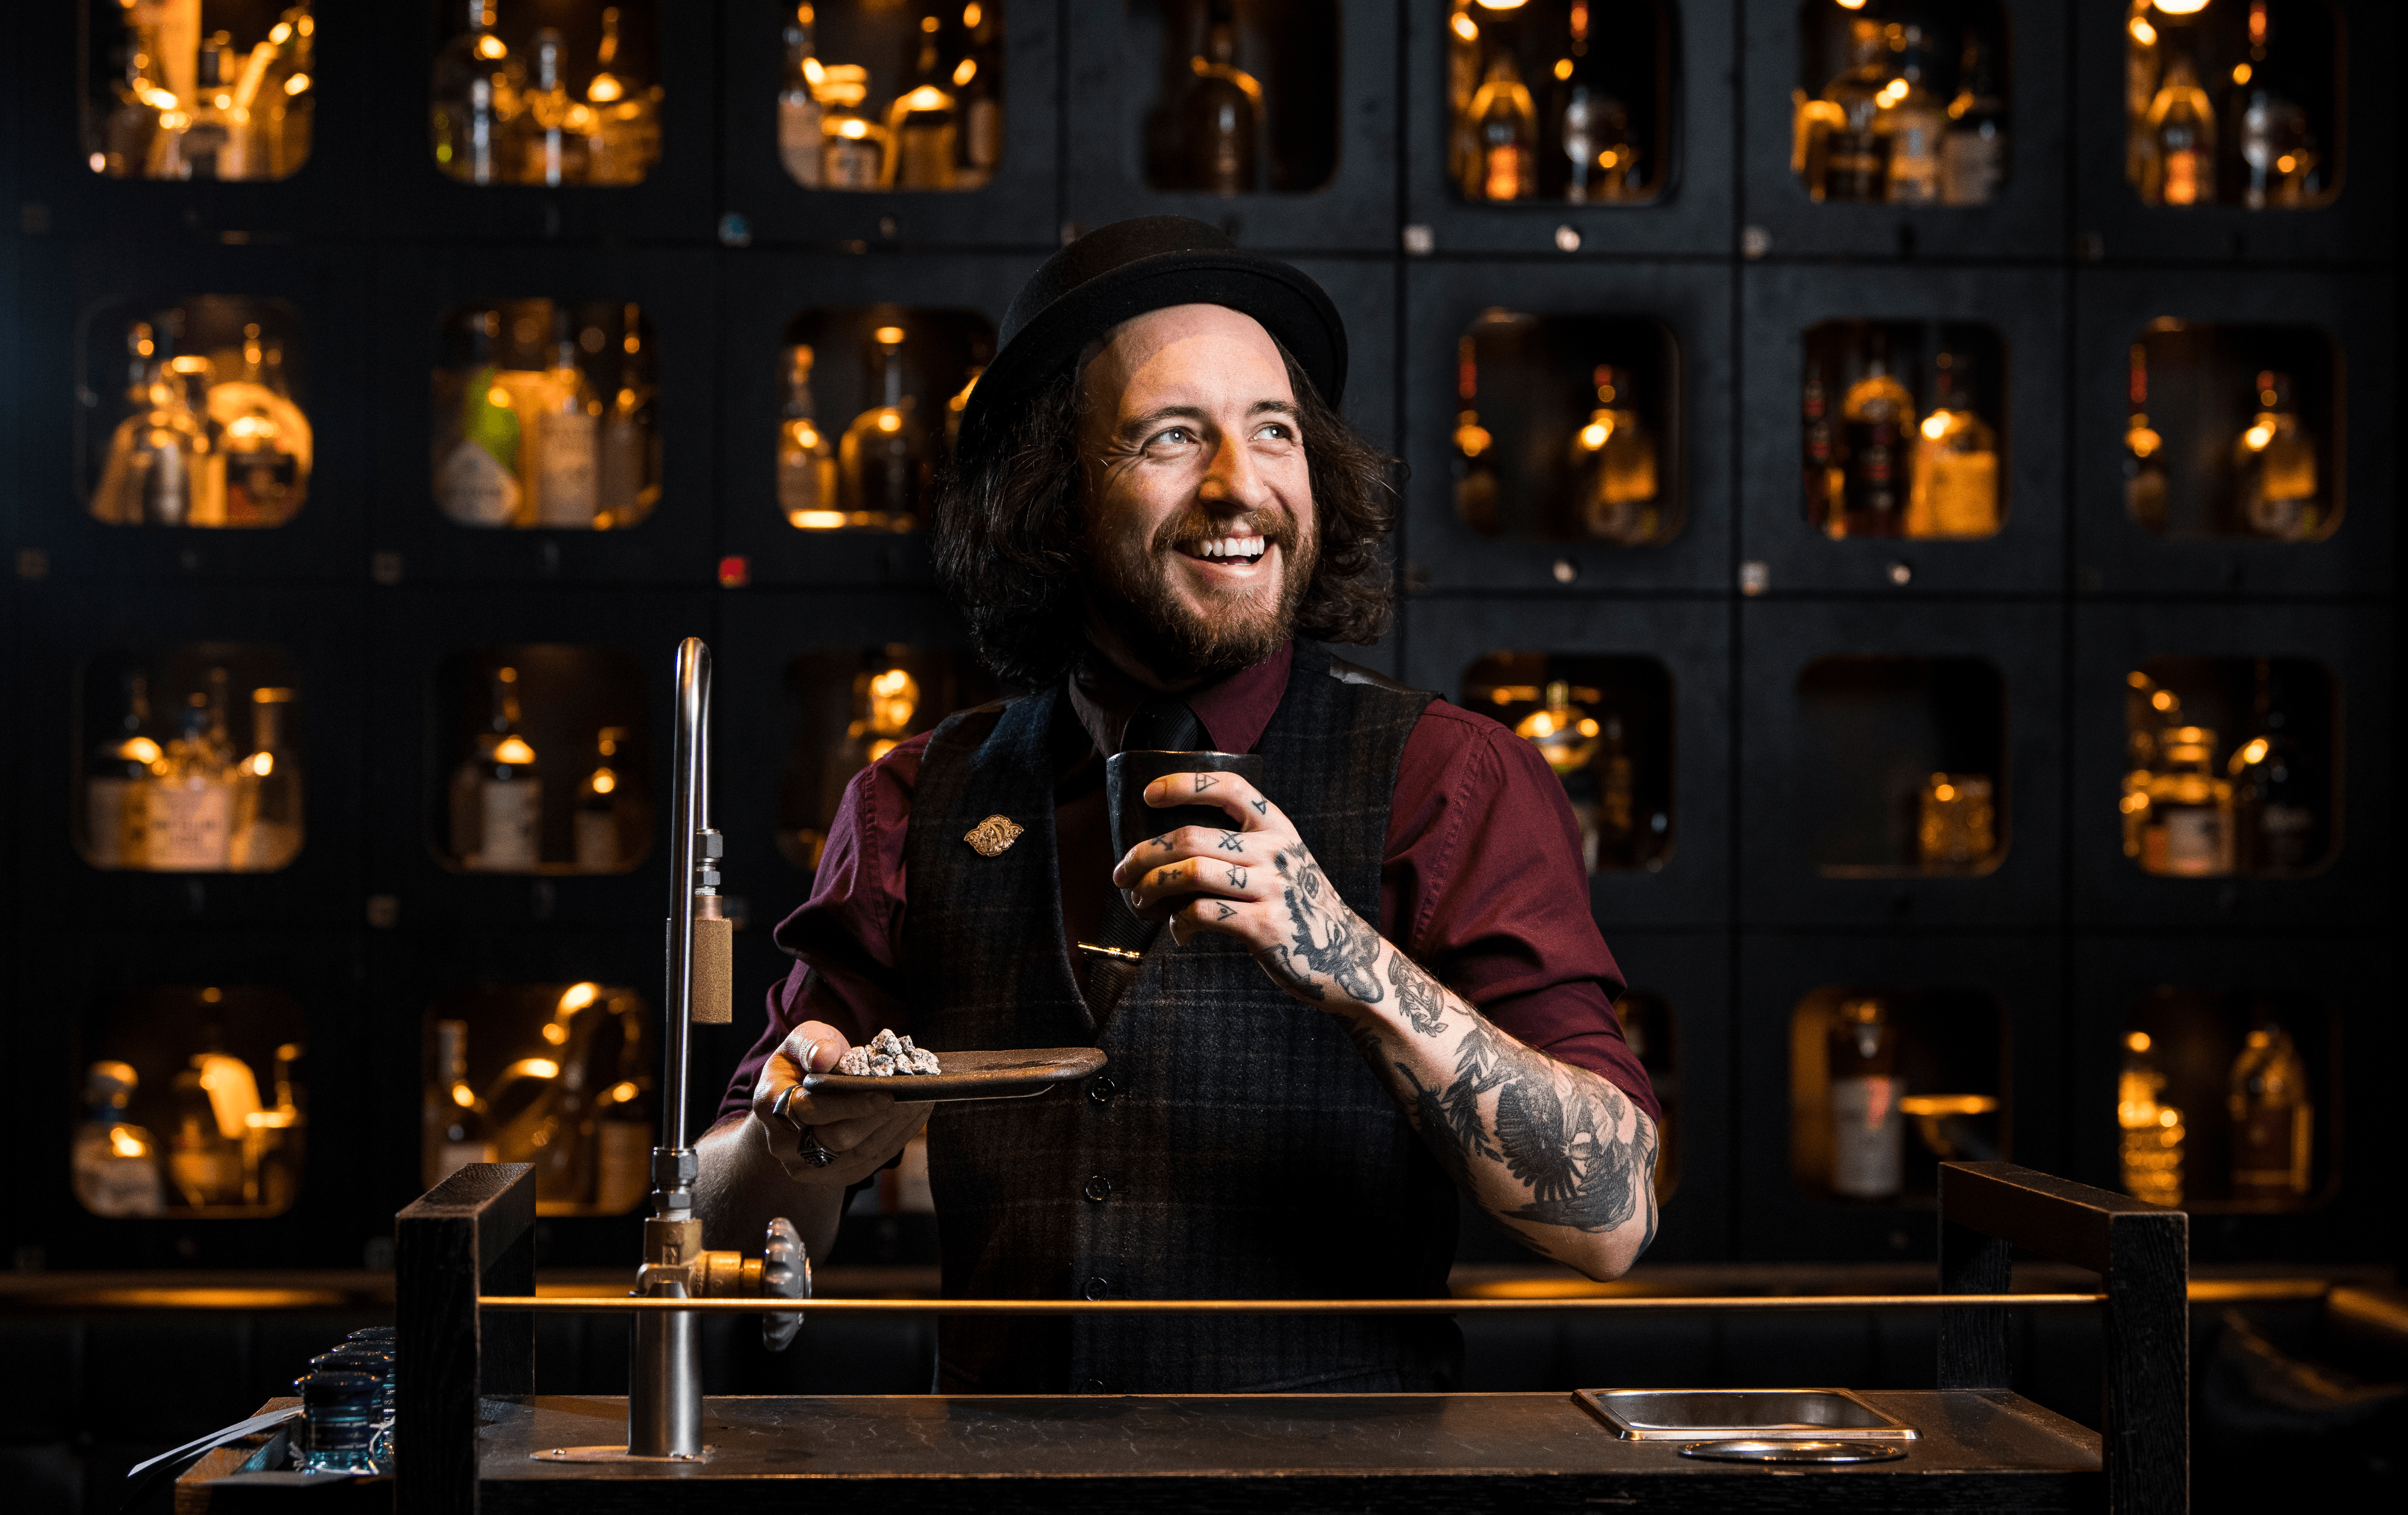 A person smiling while serving cocktails and one of the best cocktails bars Melbourne cbd